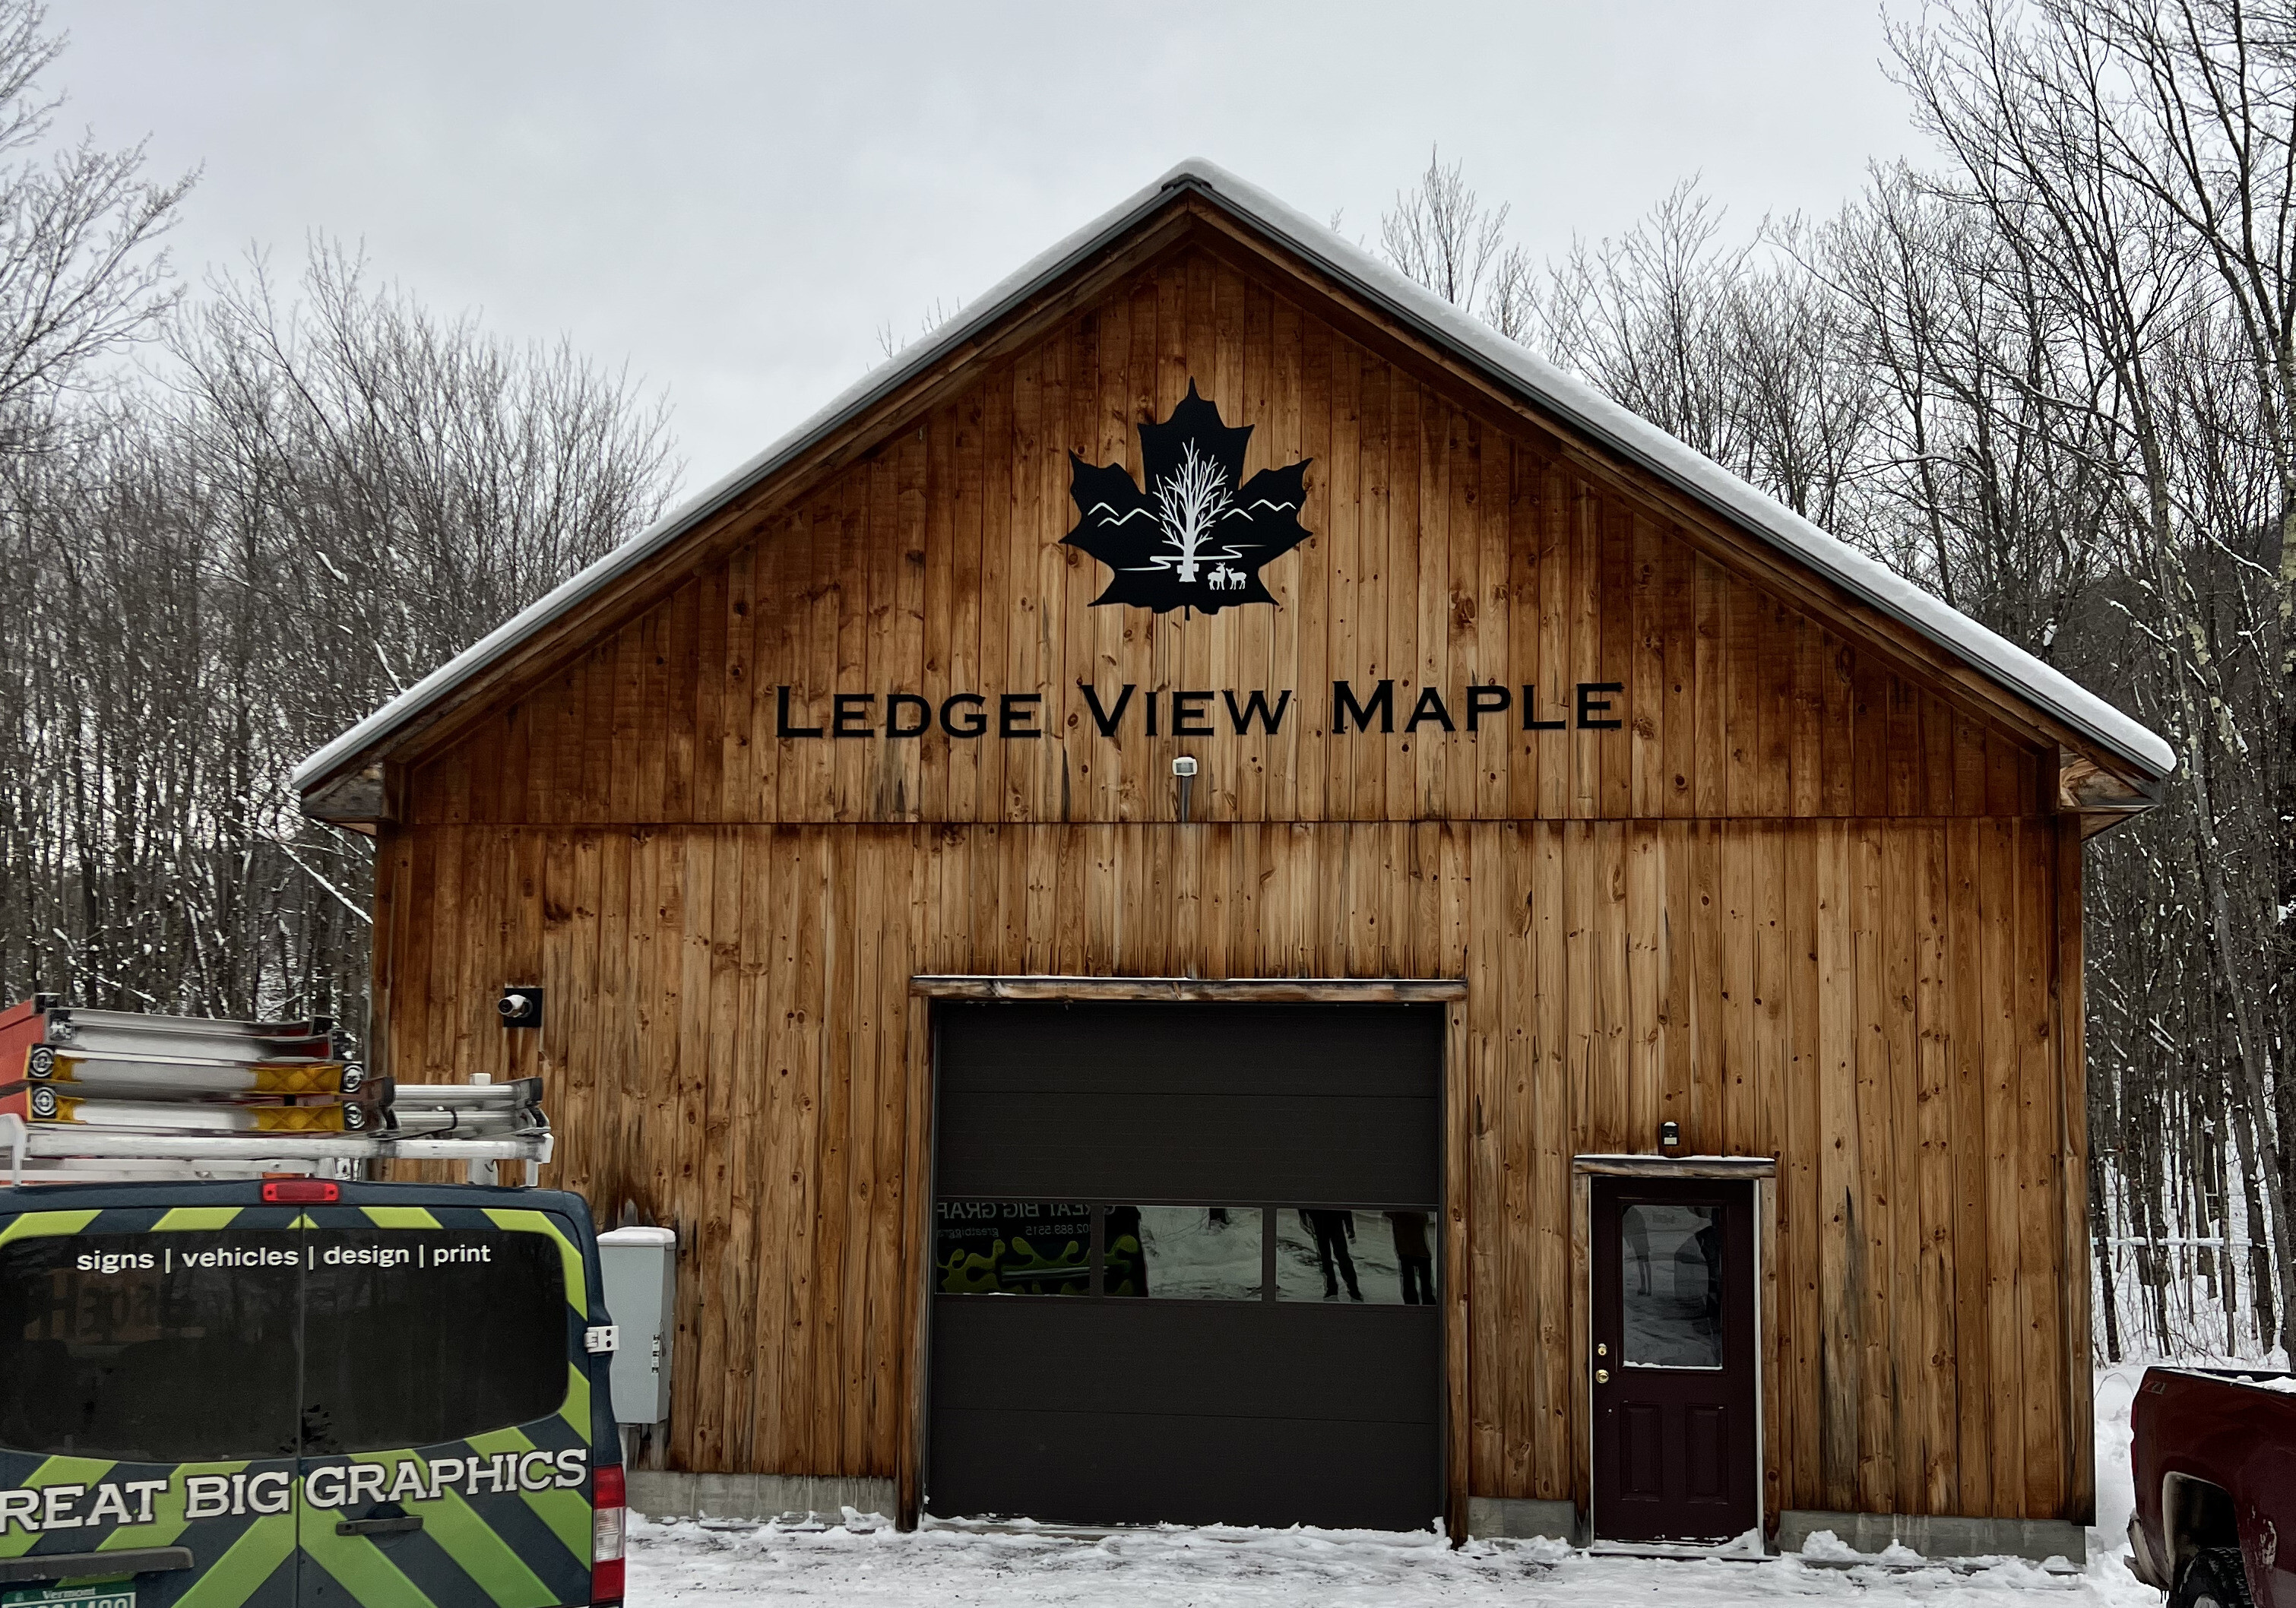 Ledge View Maple sign by Great Big Graphics